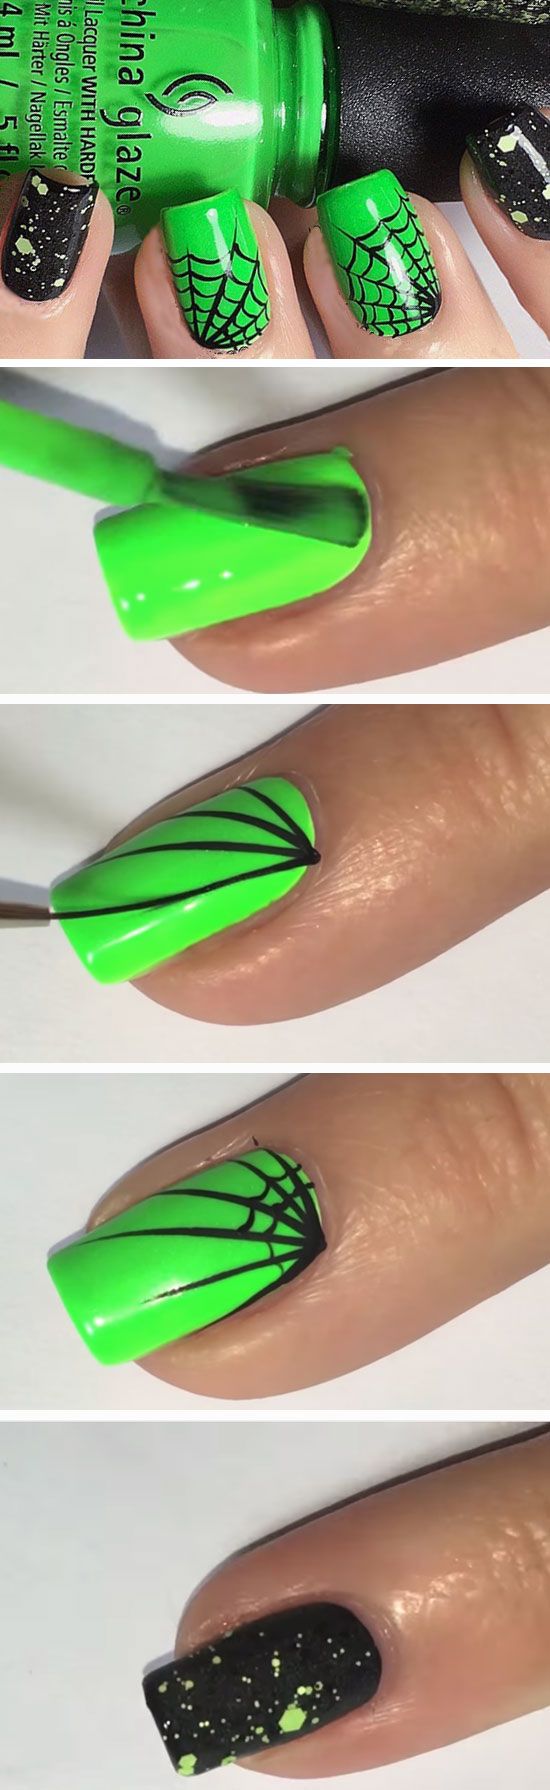 Green And Black Scary Nail Art Design